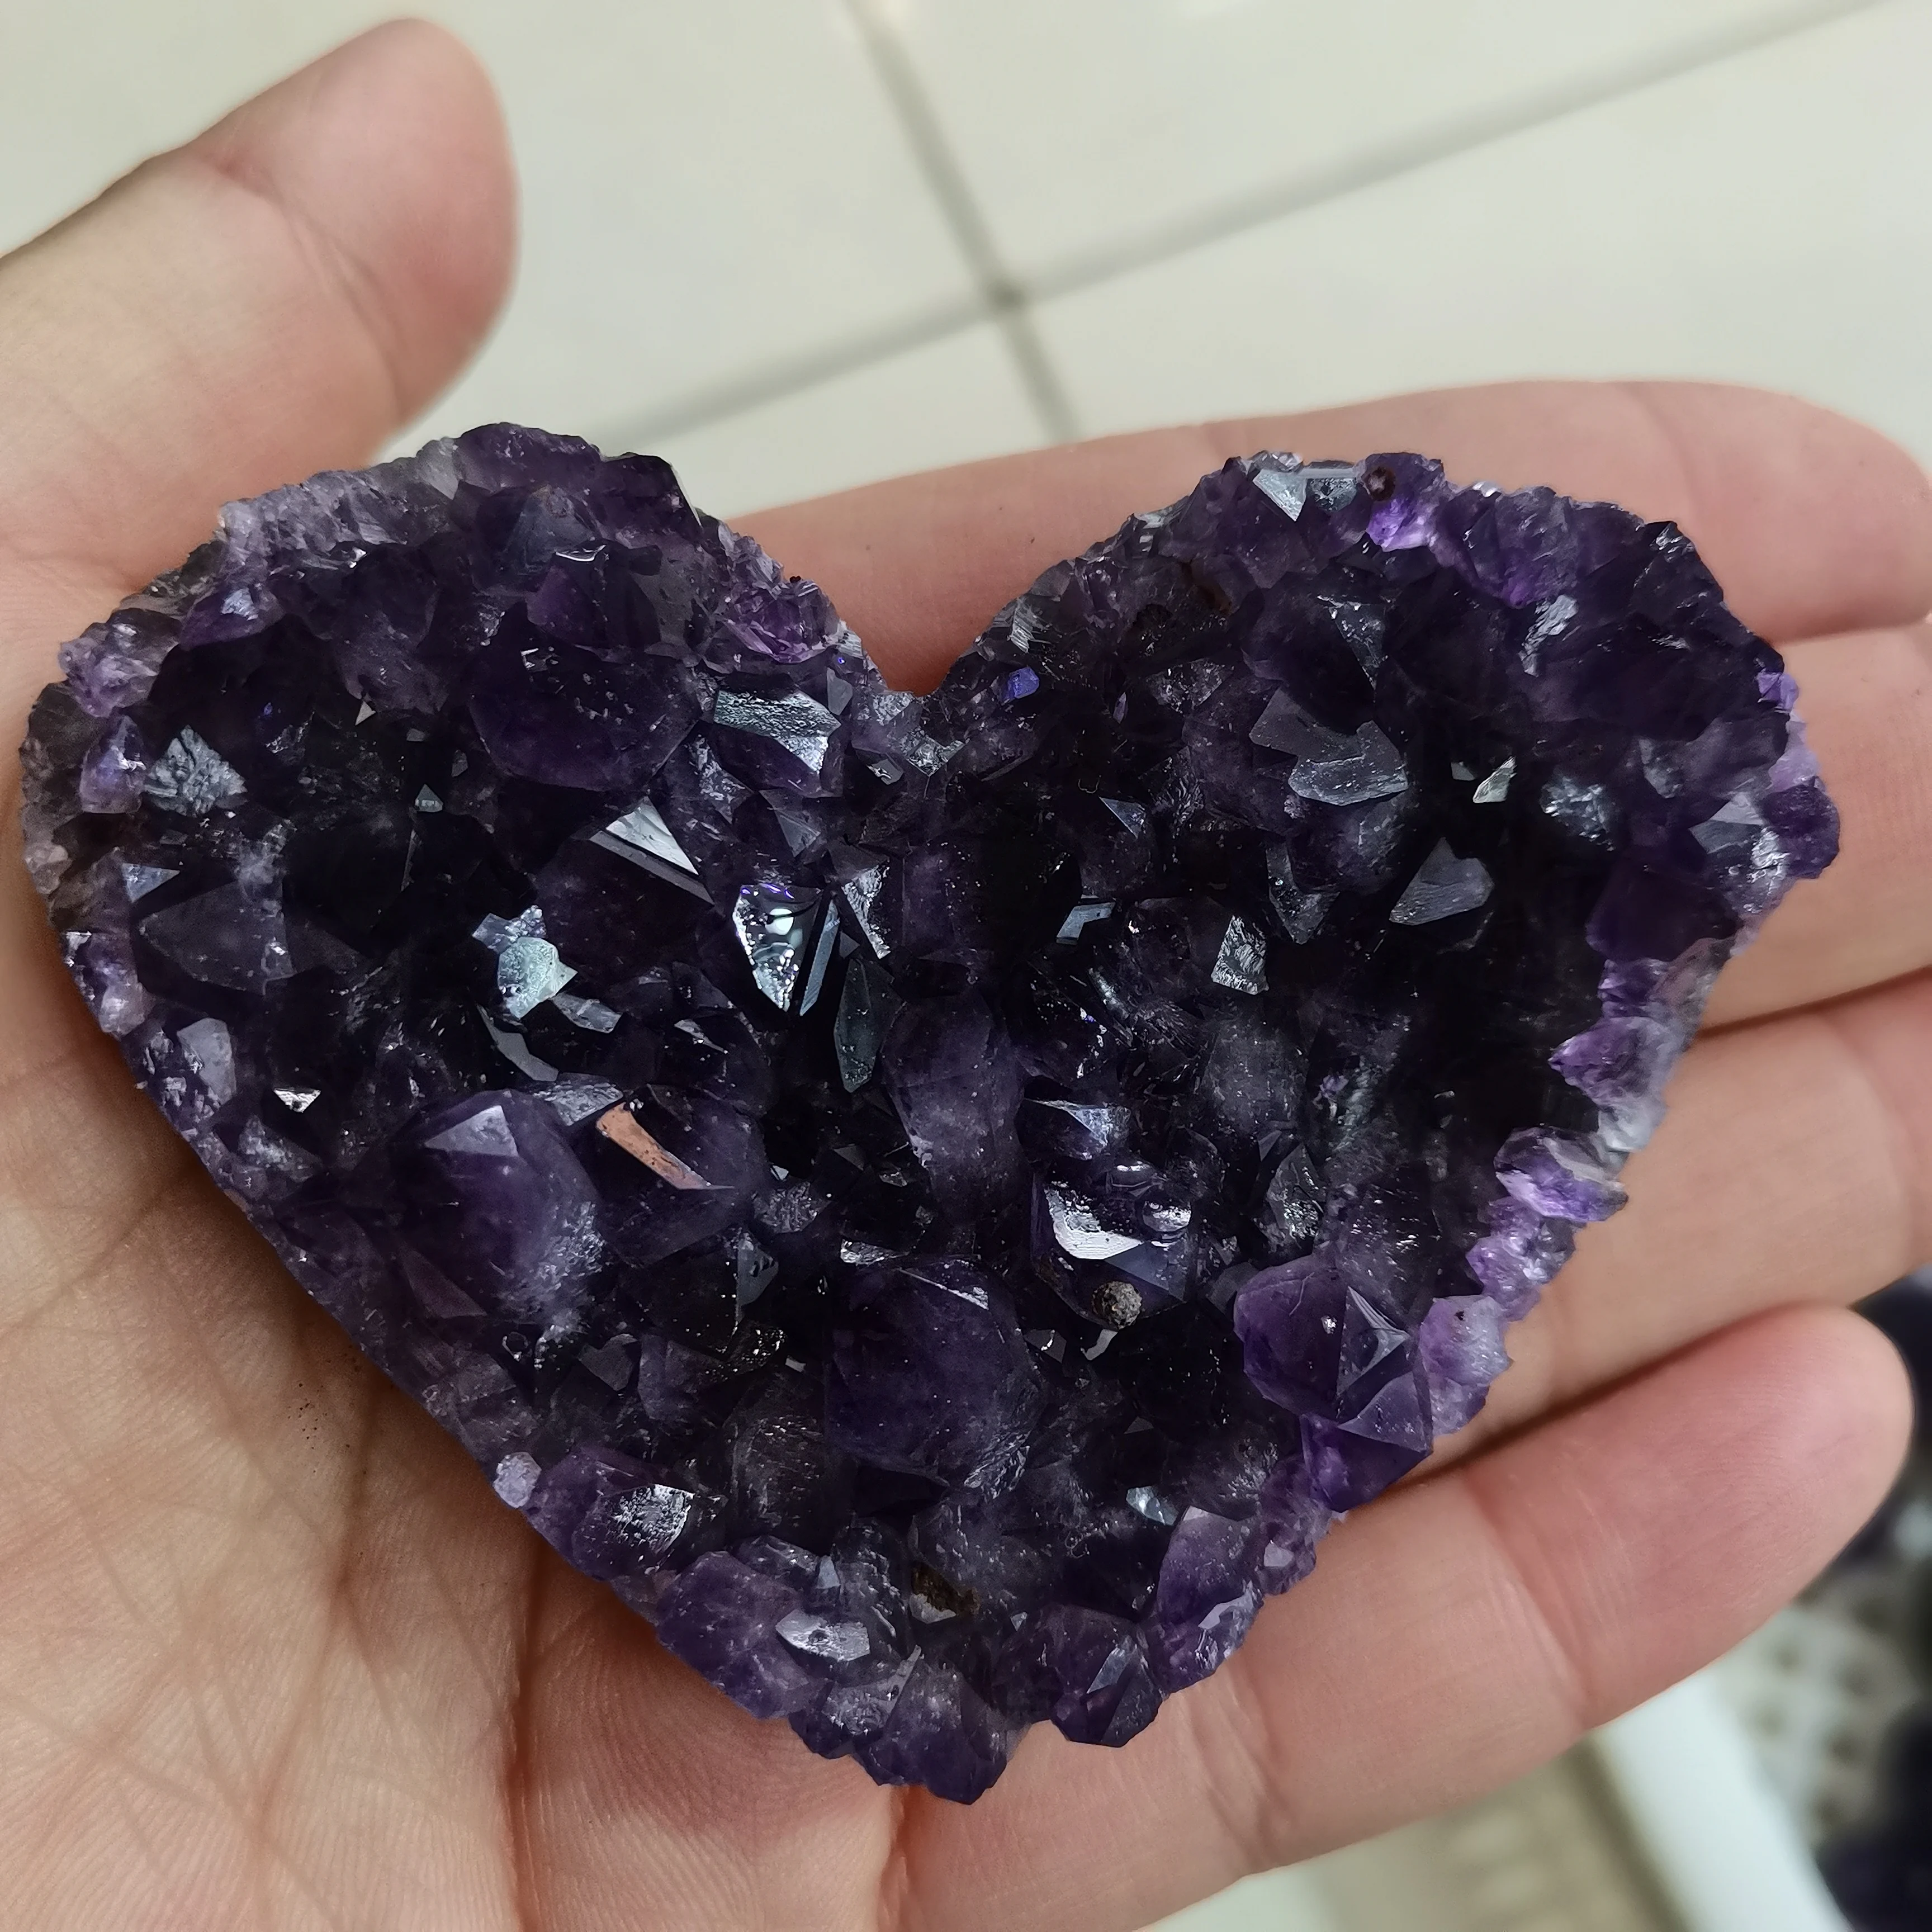 

Natural Crystal Raw Stone Amethyst Heart Shape Cluster Healing Stone Amethyst Rough Gemstone For Jewelry Making